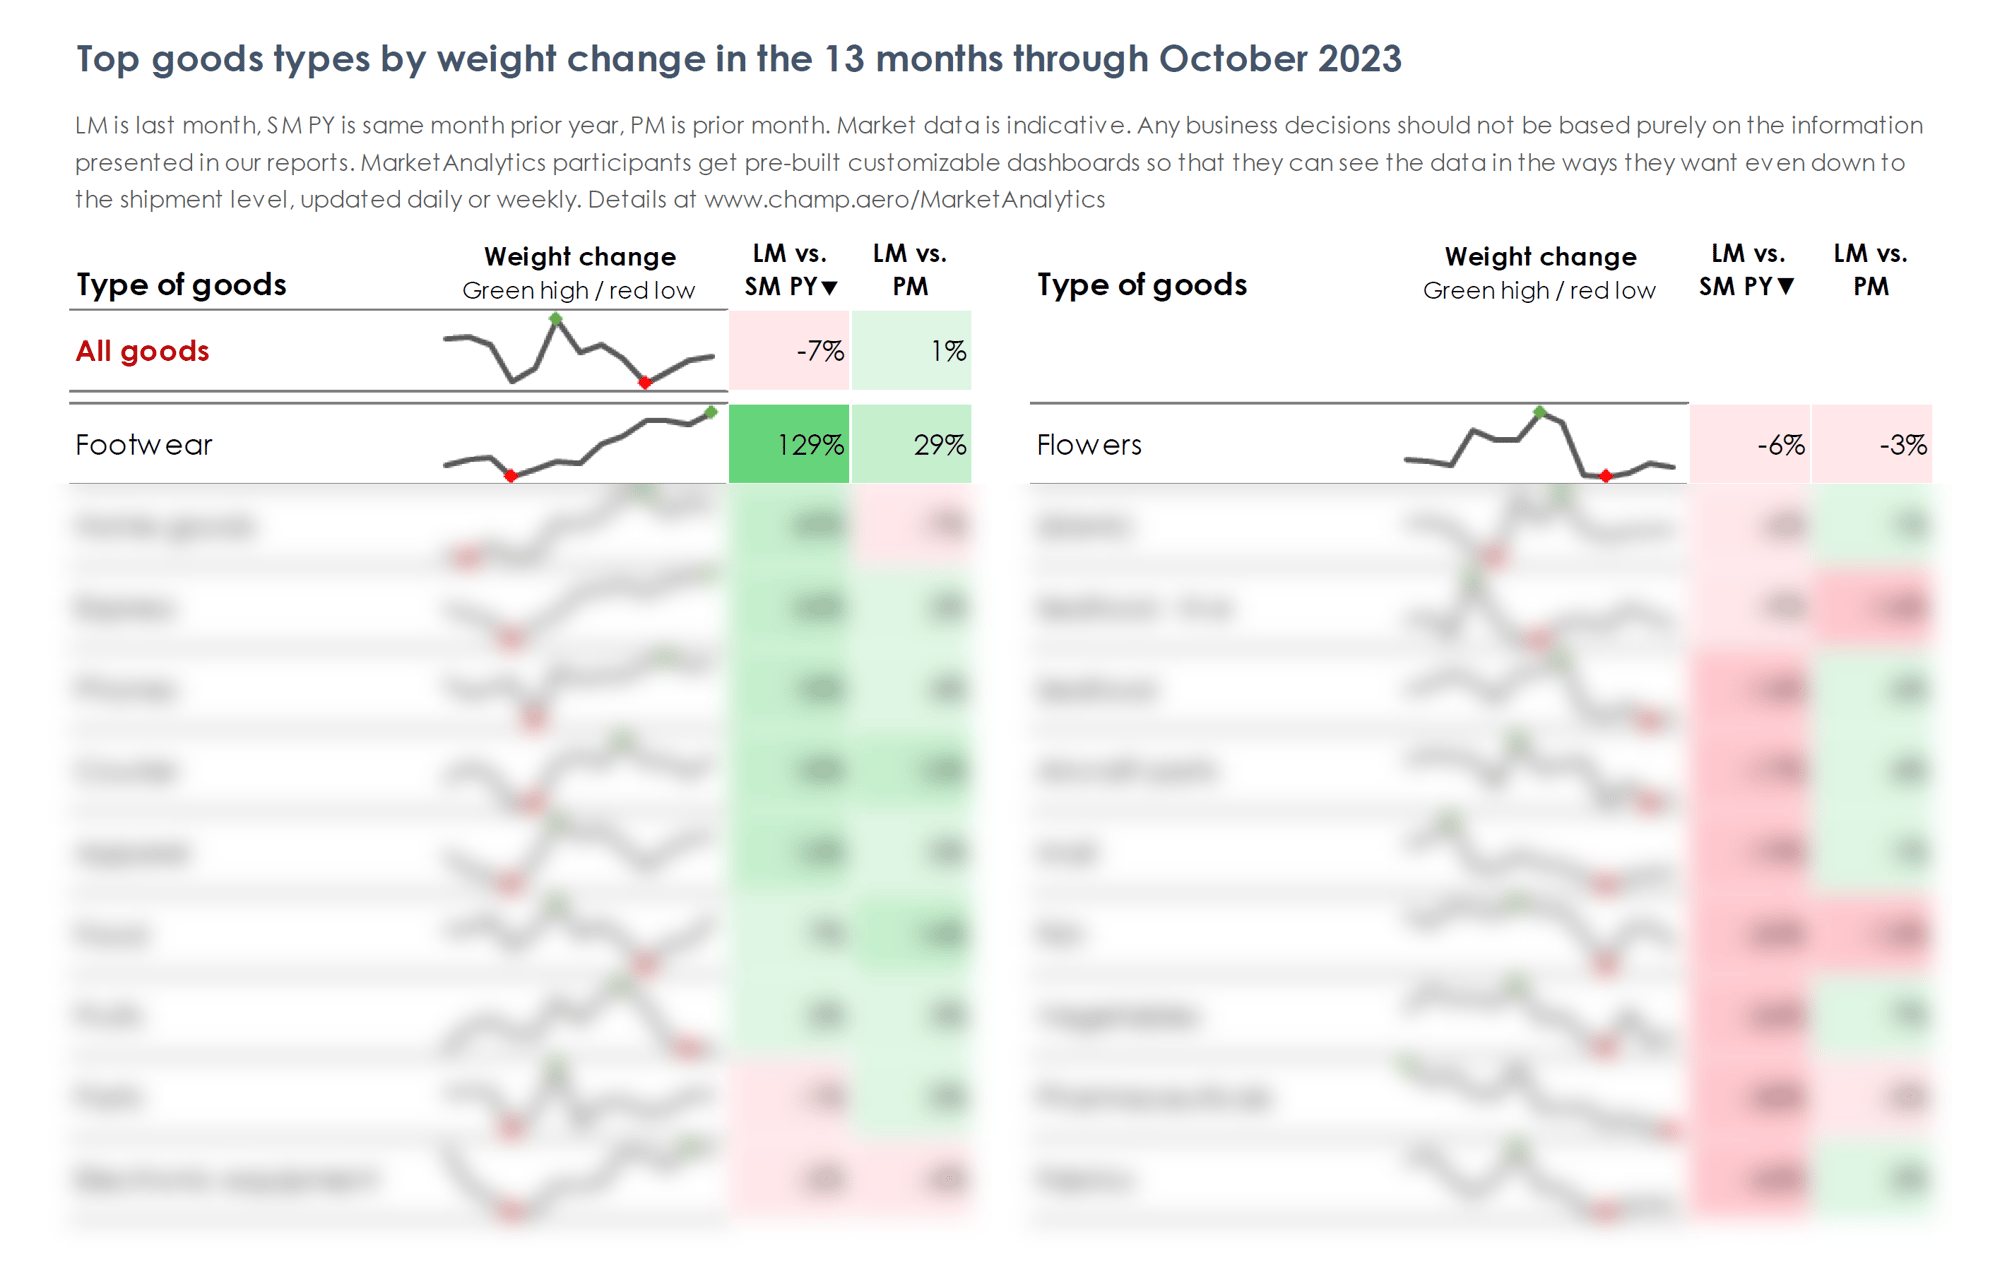 ACMT Nov 2023 - Top goods types by weight change